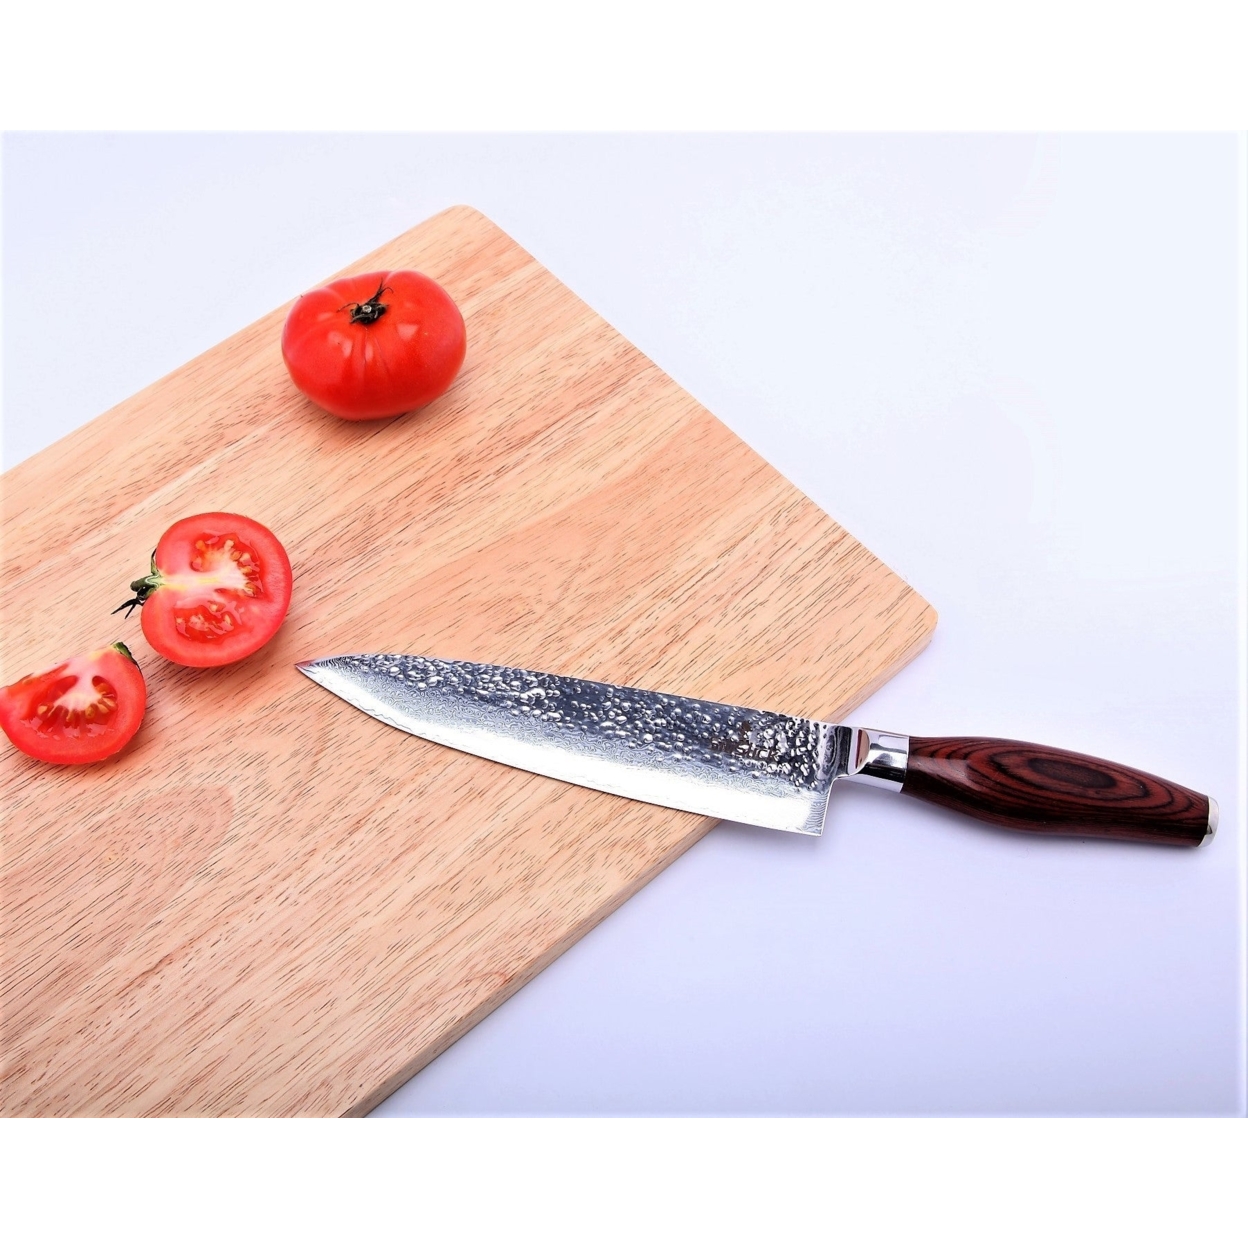 Damascus Stainless Steel Knife - Chef Hammered Design